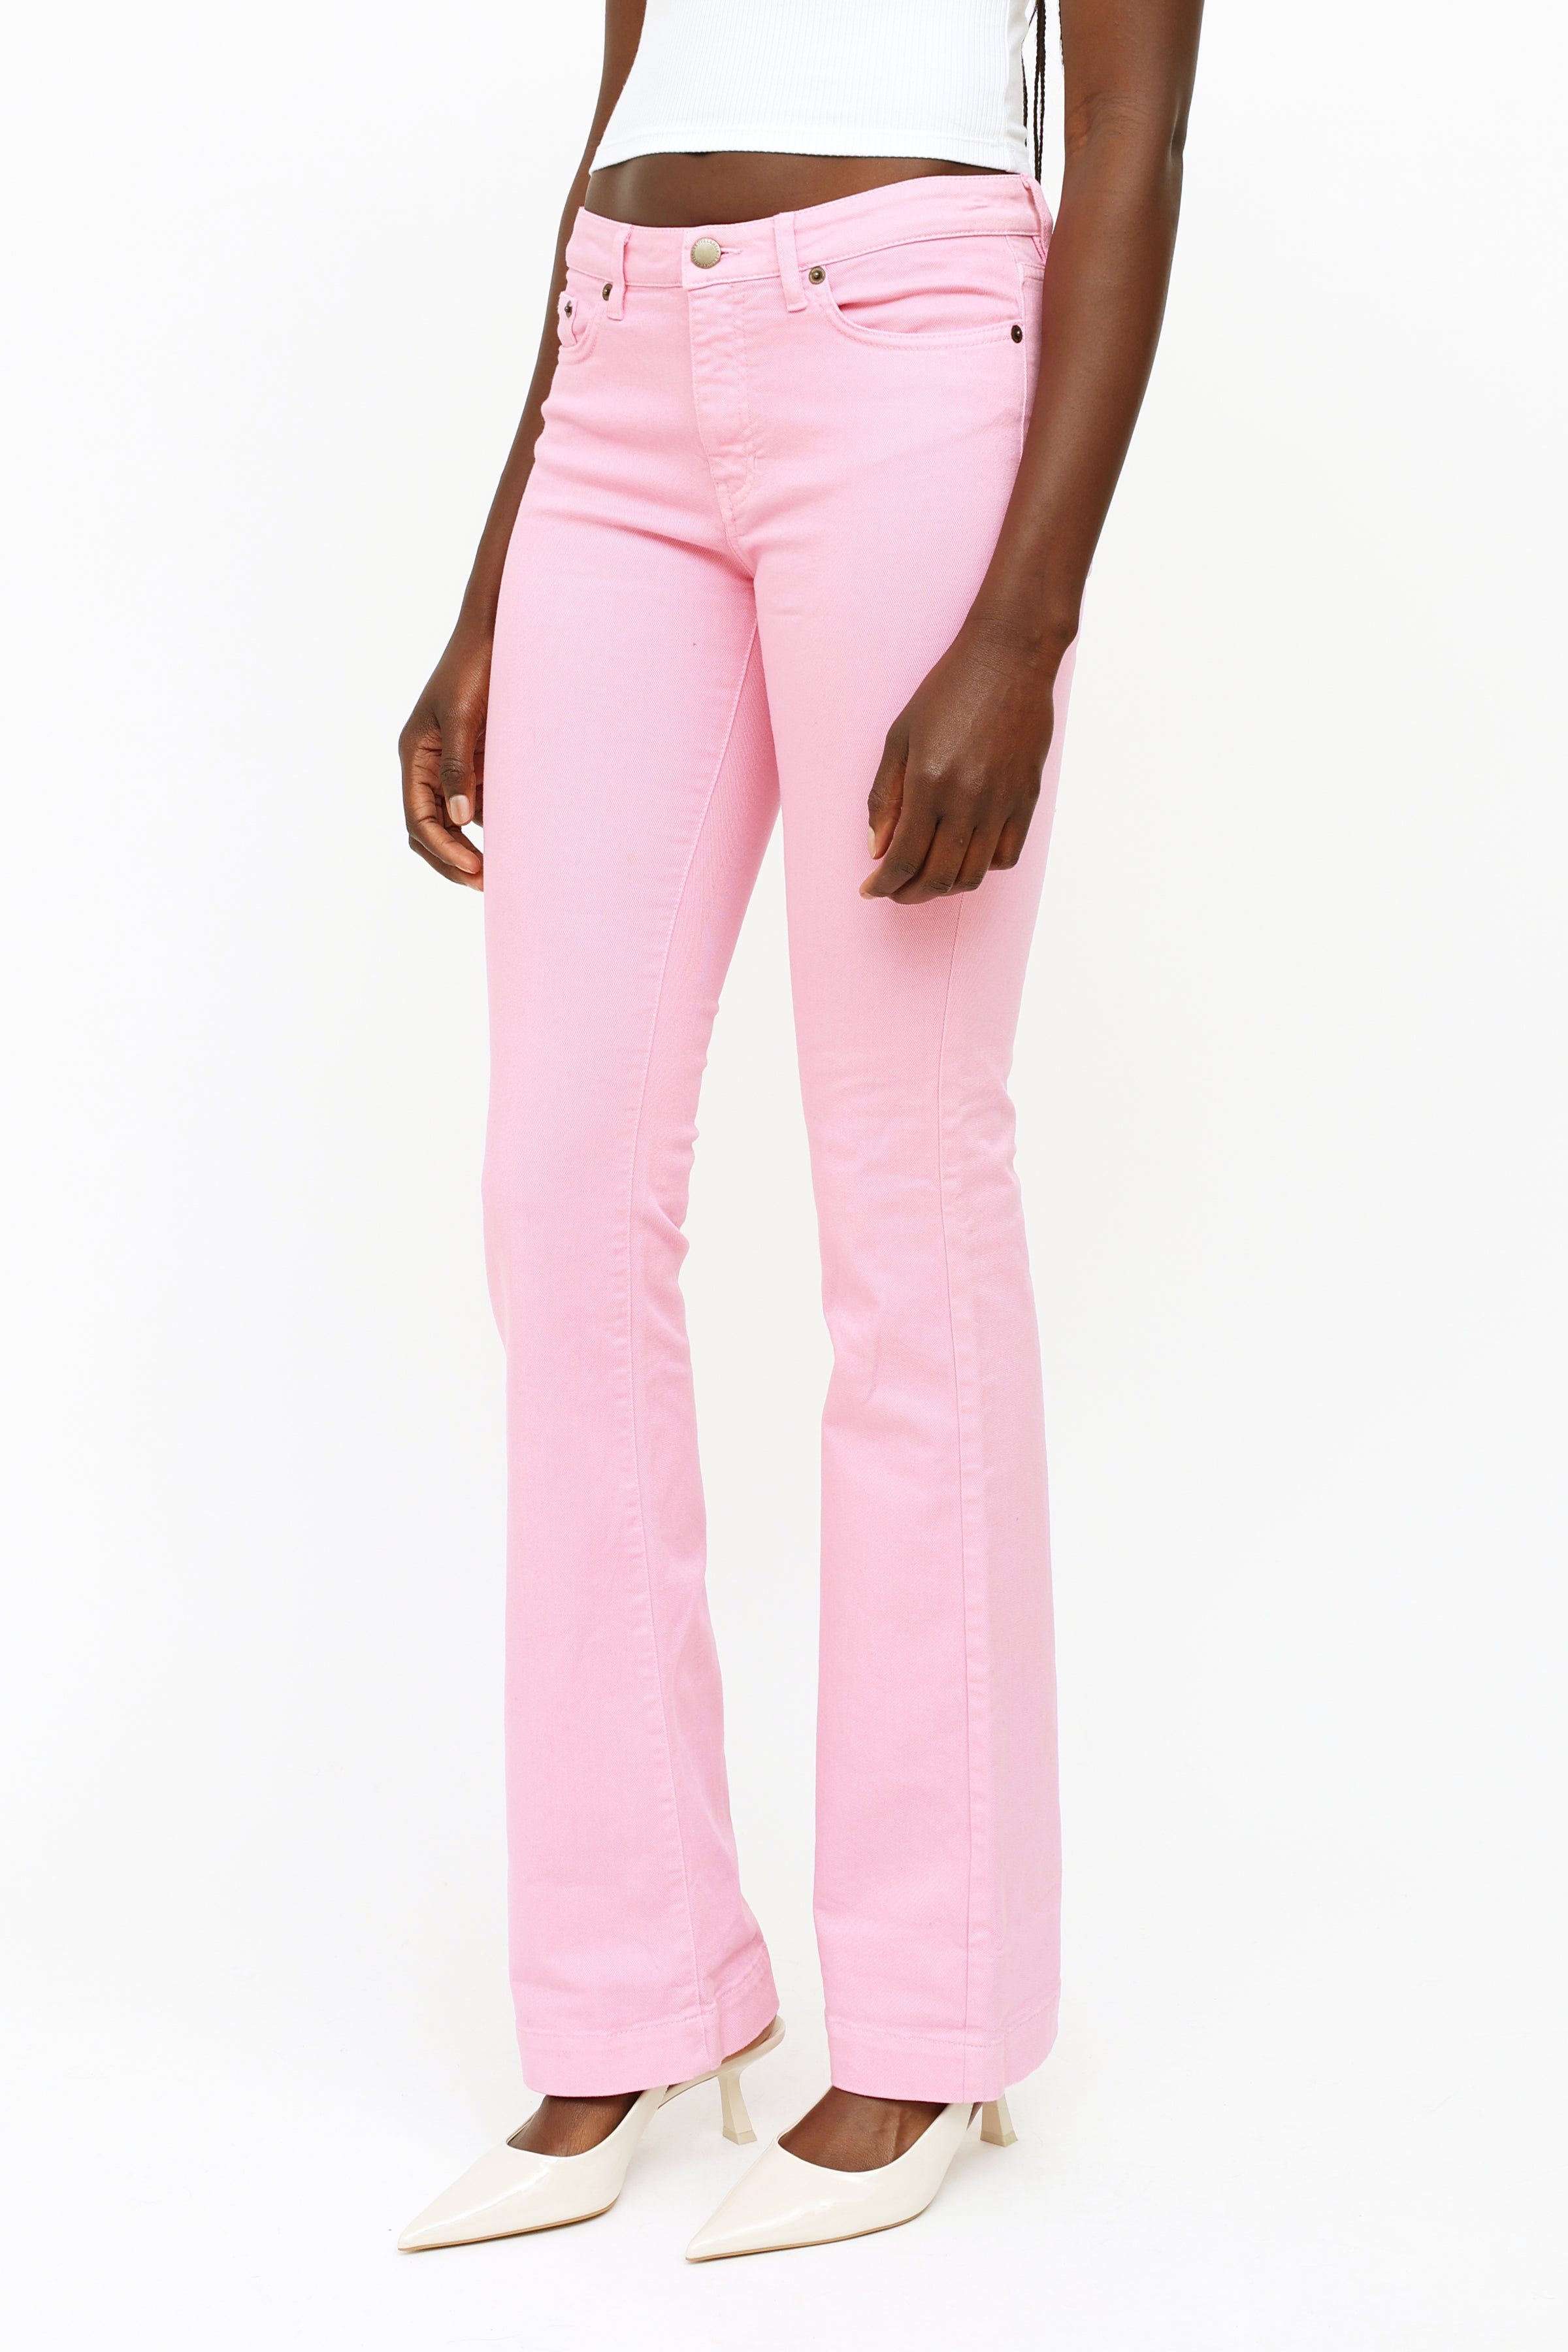 Red Valentino // Pink Denim Low Rise Jeans – VSP Consignment